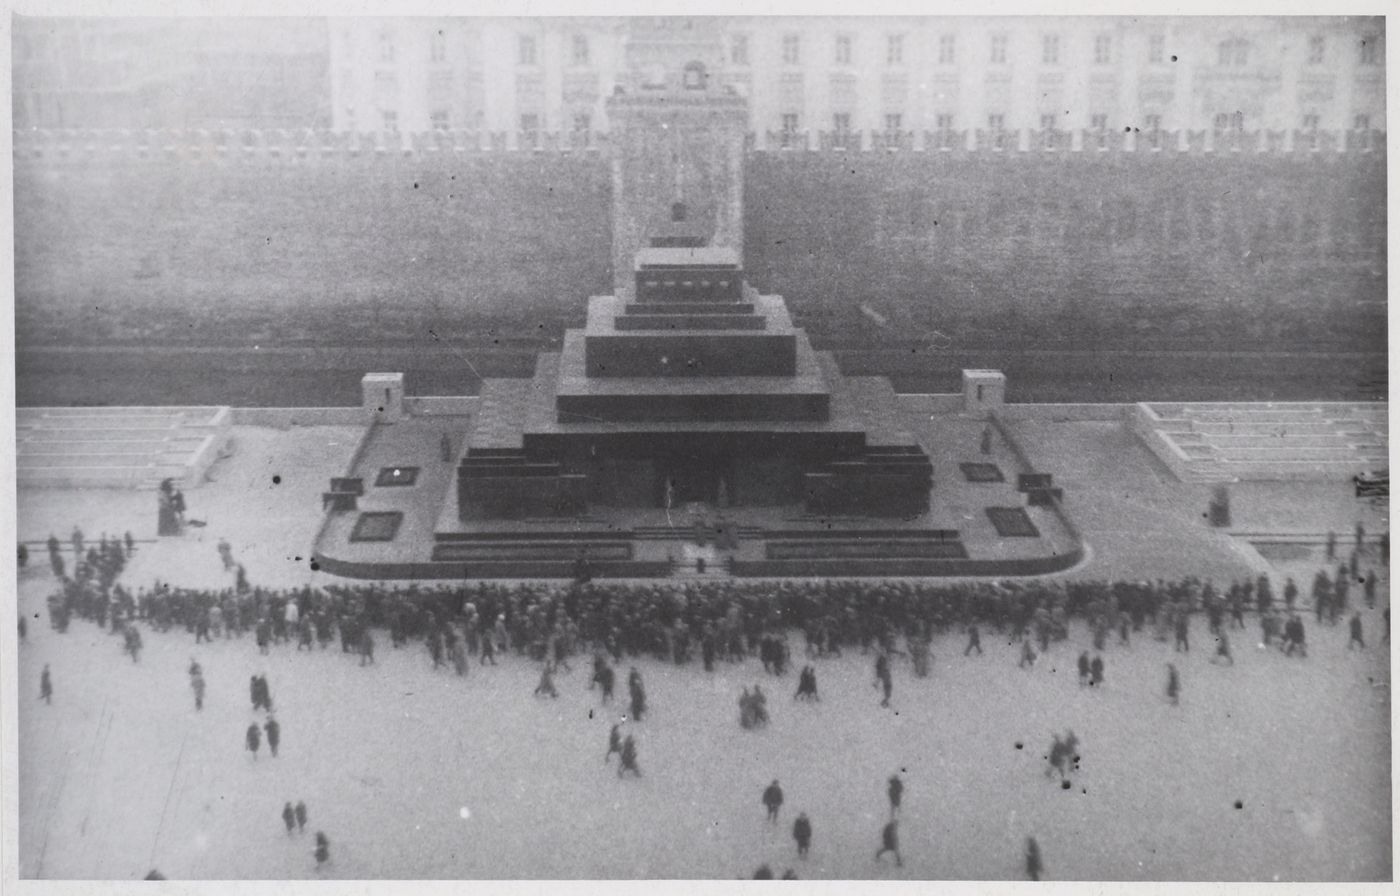 View of the stone Lenin Mausoleum from an elevated viewpoint, Red Square, Moscow